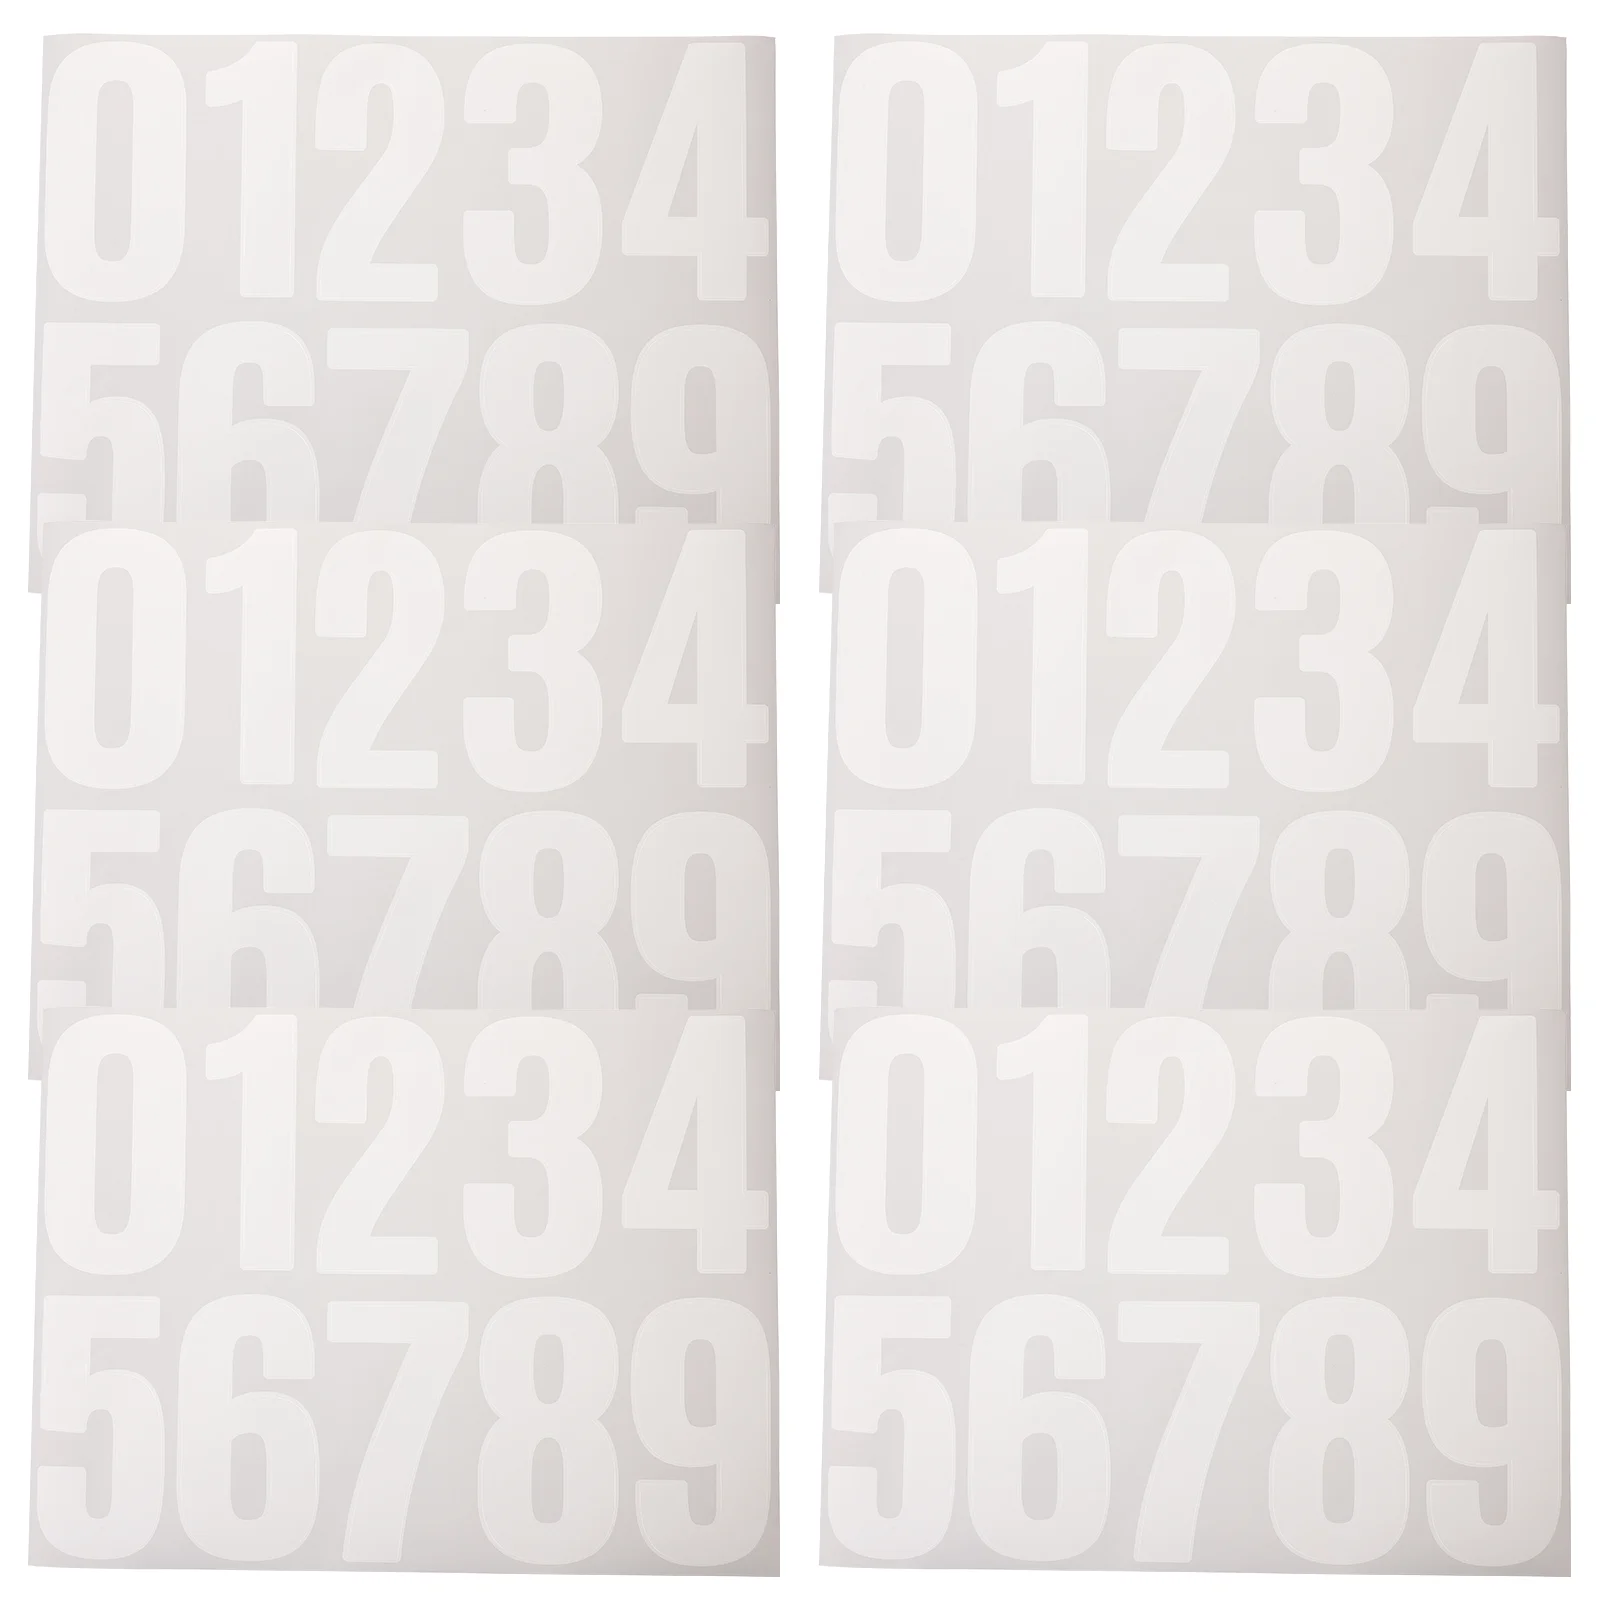 

6 Sheets Stickers Racing Number Decals Adhesive Numbers Bins Large White Mailbox DIY Trash Can Block